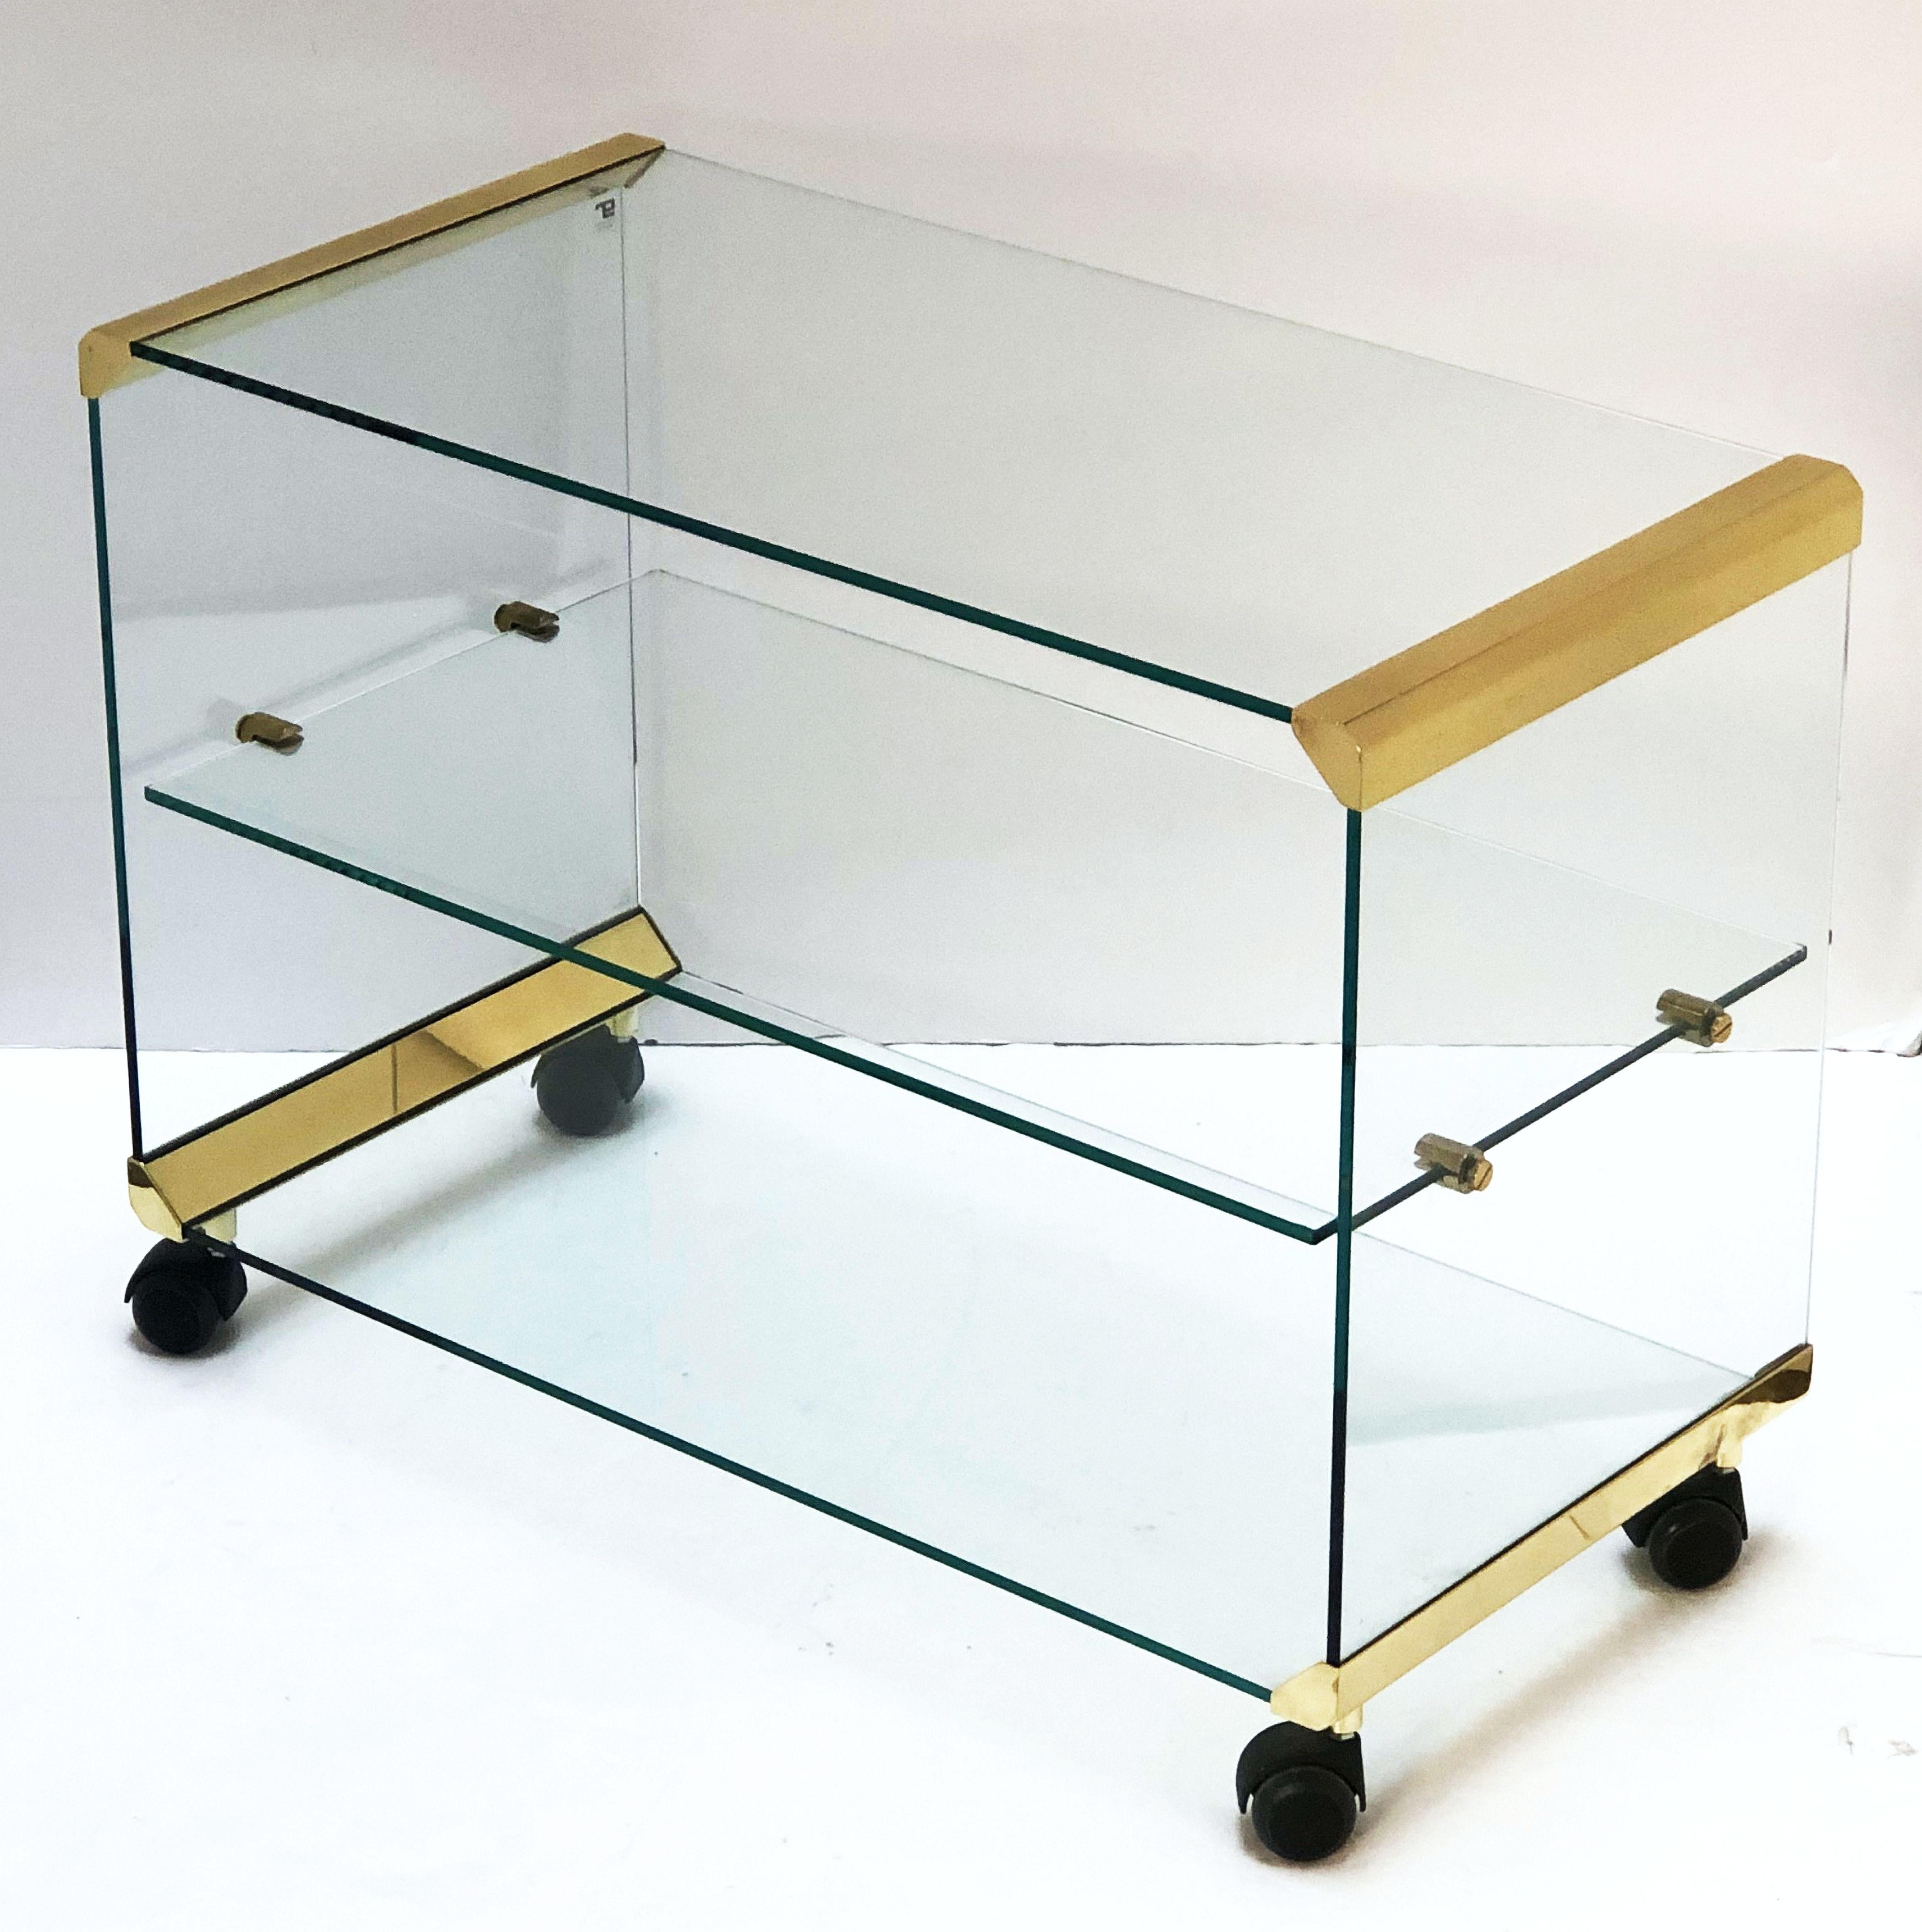 A fine Italian drinks cart (bar cart) or trolley server of glass and brass, in the modernist style, by the celebrated Italian design firm, Gallotti and Radice. Featuring three tiers - the glass structure held together with handsome brass hardware